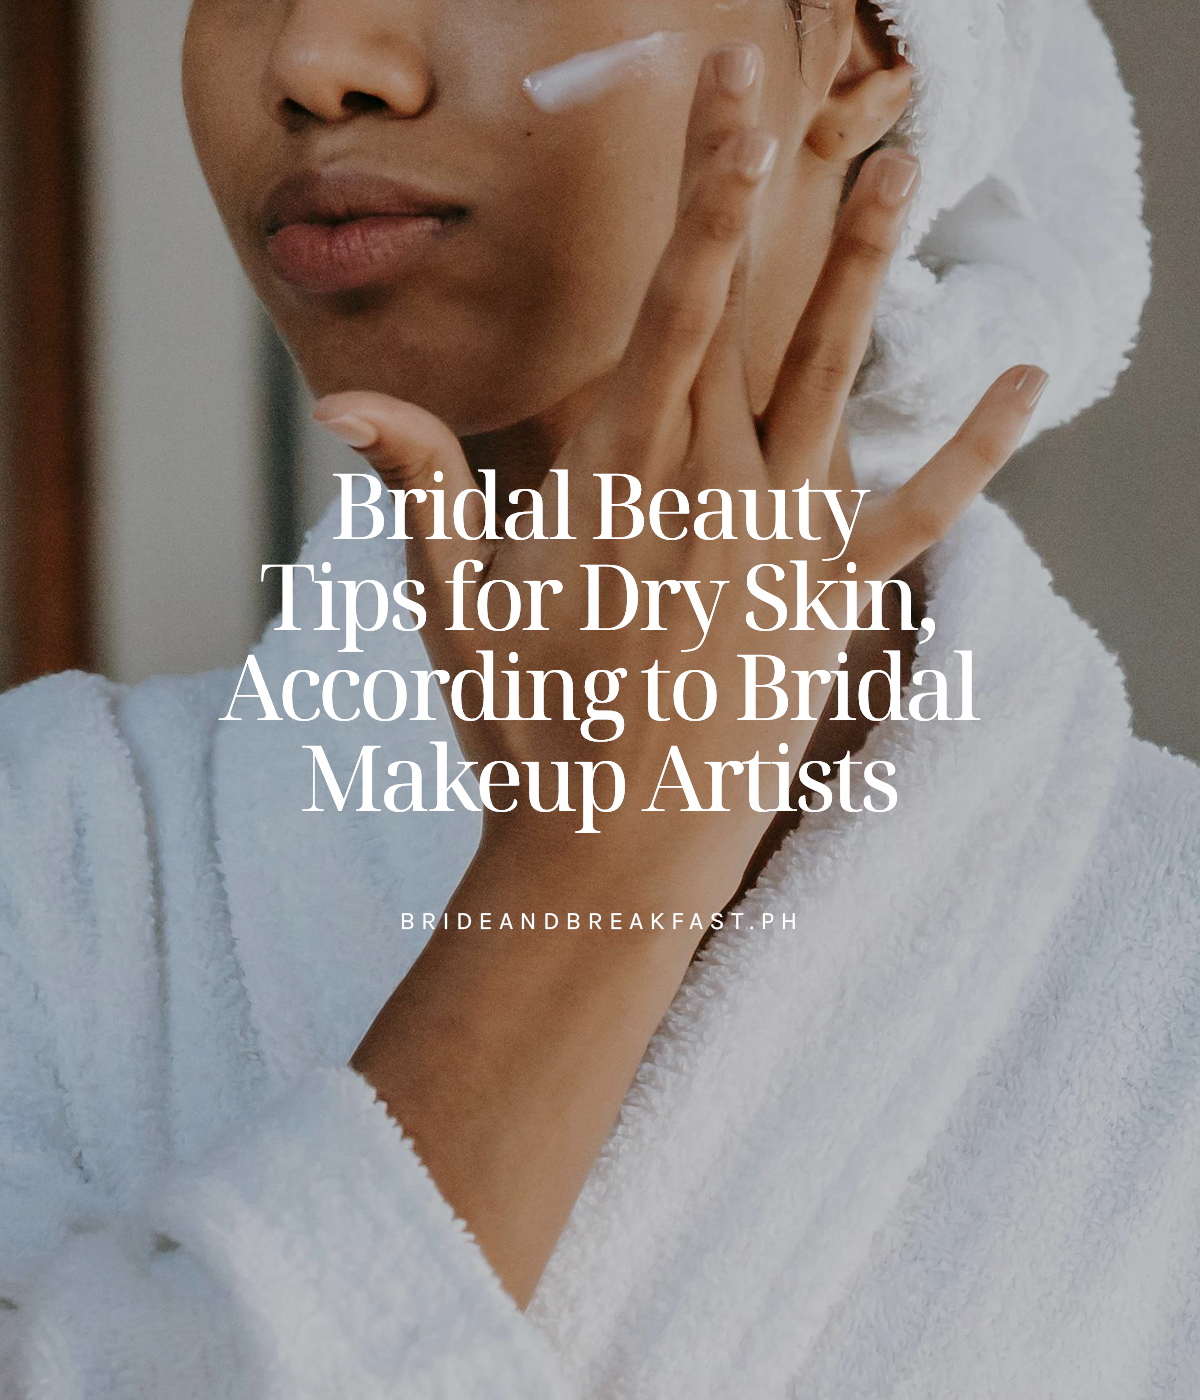 Bridal Beauty Tips for Dry Skin, According to Bridal Makeup Artists